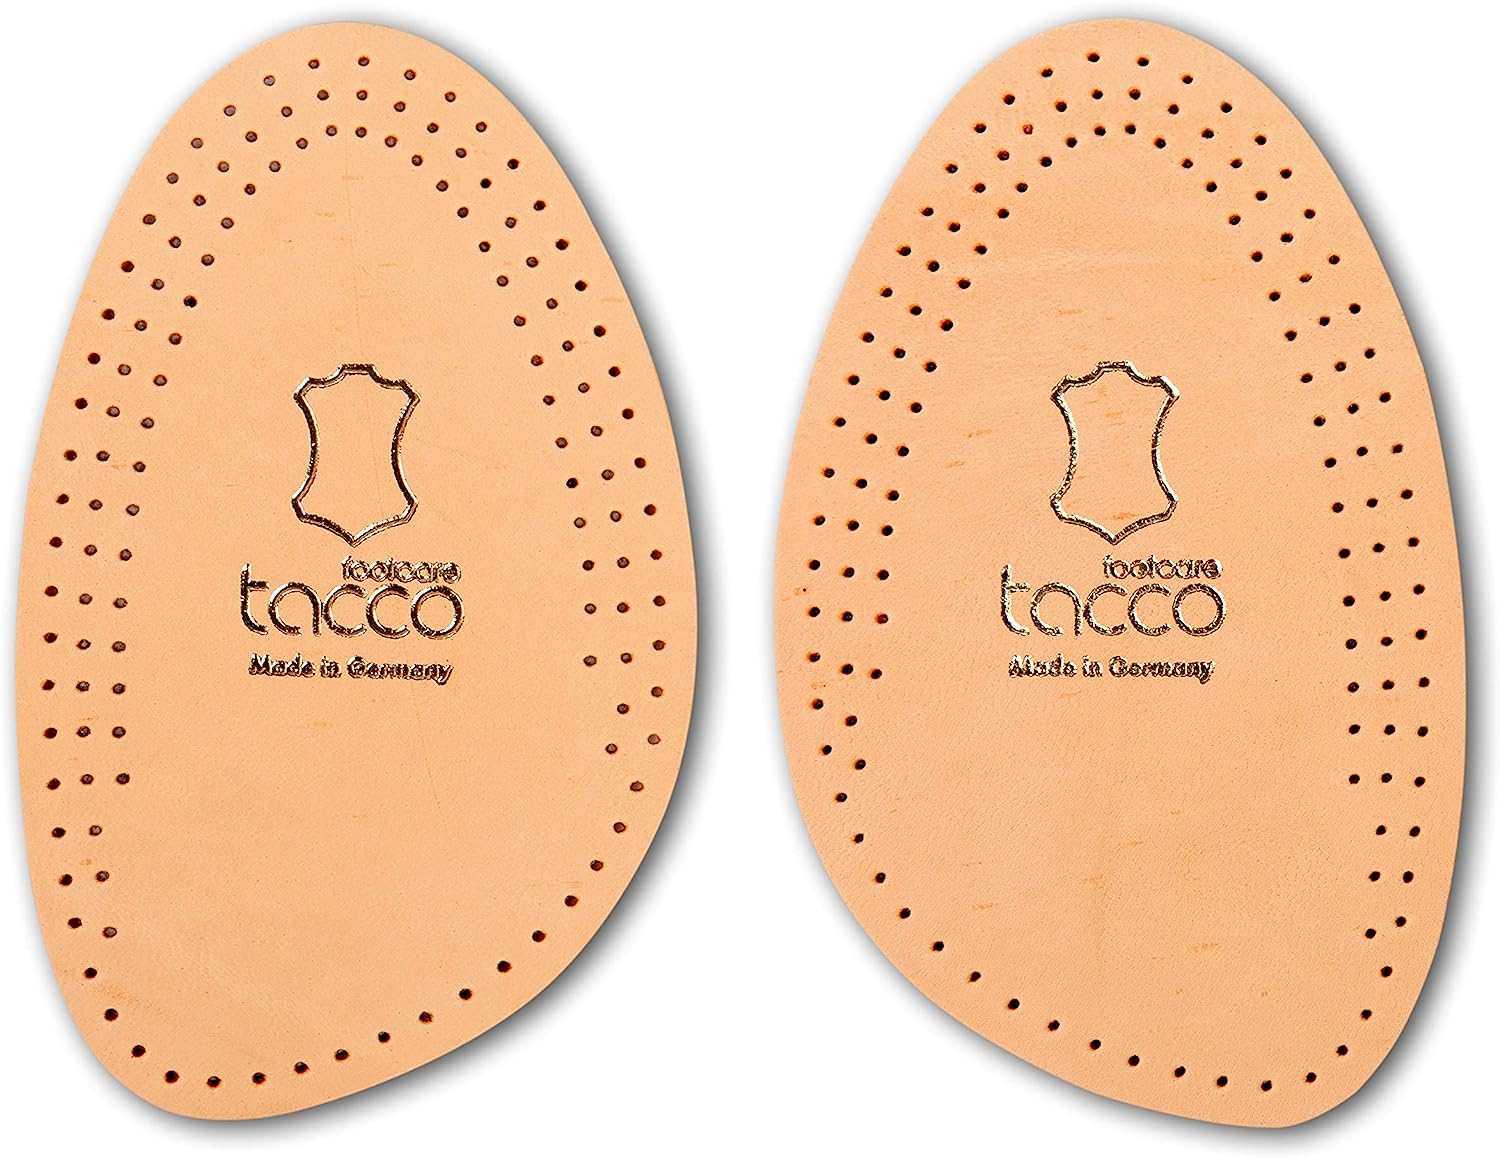 Tacco Footcare Luxus Light Forefoot Front Half Shoe Insoles Pads Cushions UK Size 5 RRP 7.69 CLEARANCE XL 5.99